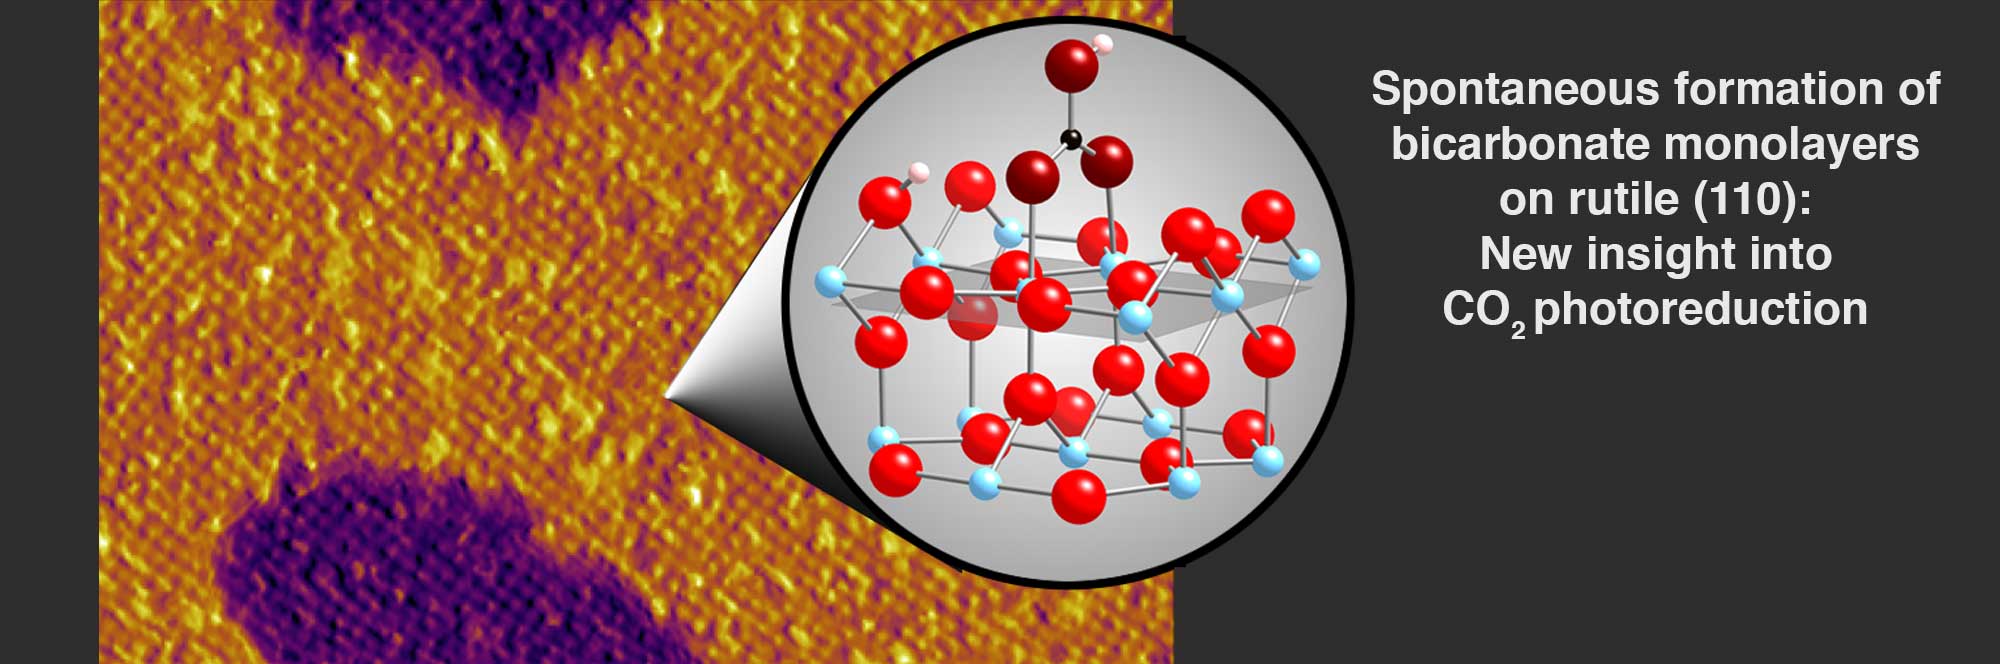 Spontaneous Formation of Monolayer